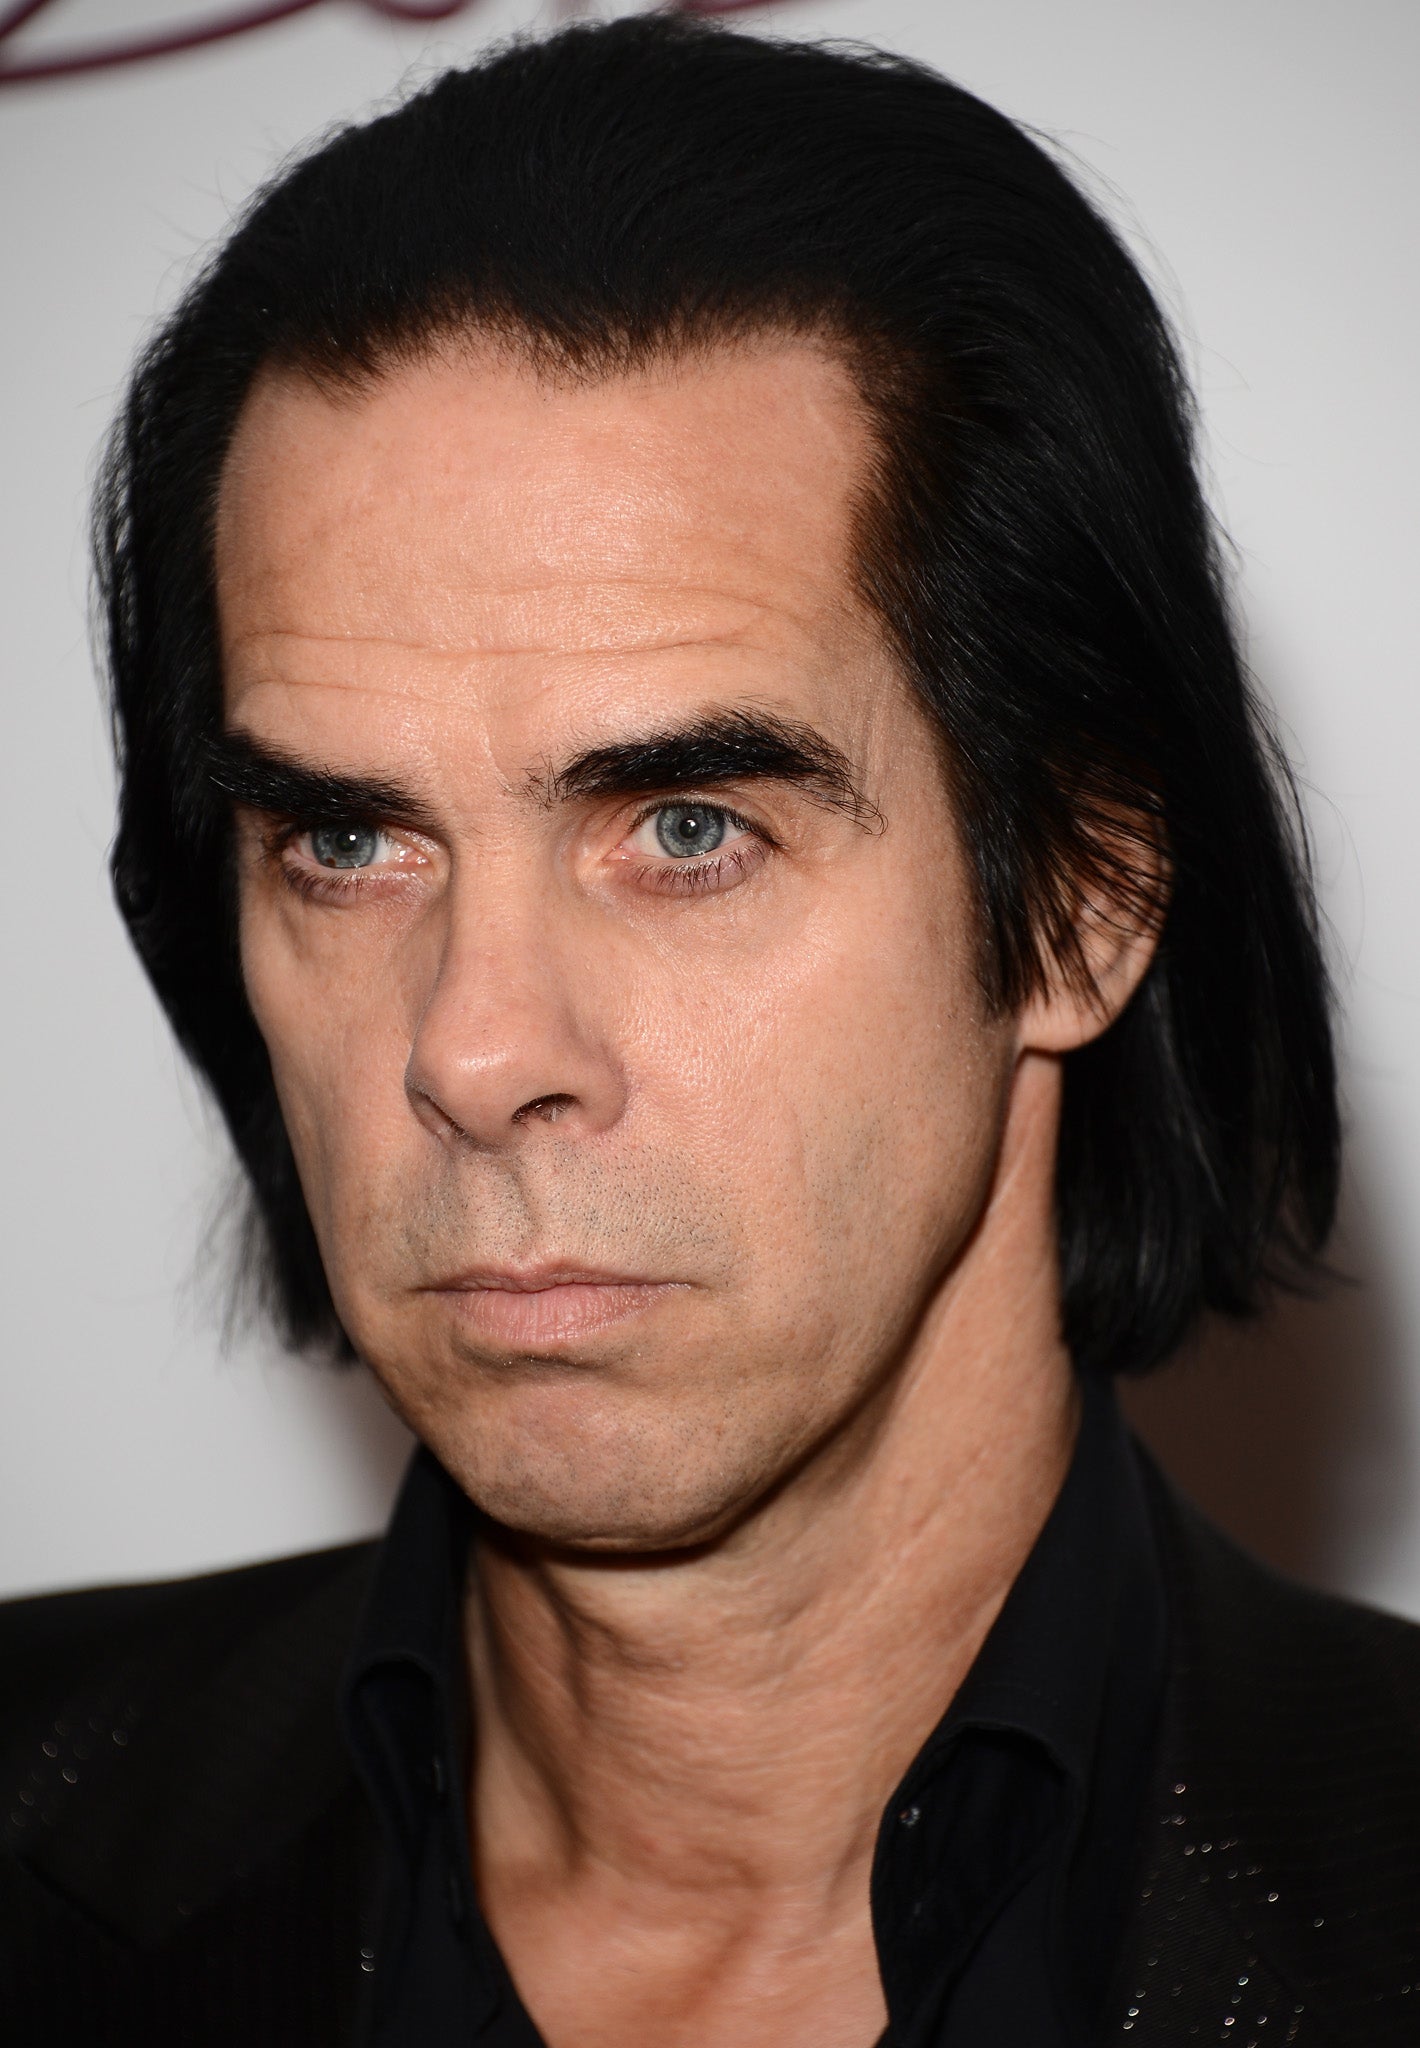 Nick Cave hated doing a Twitter Q&A with fans